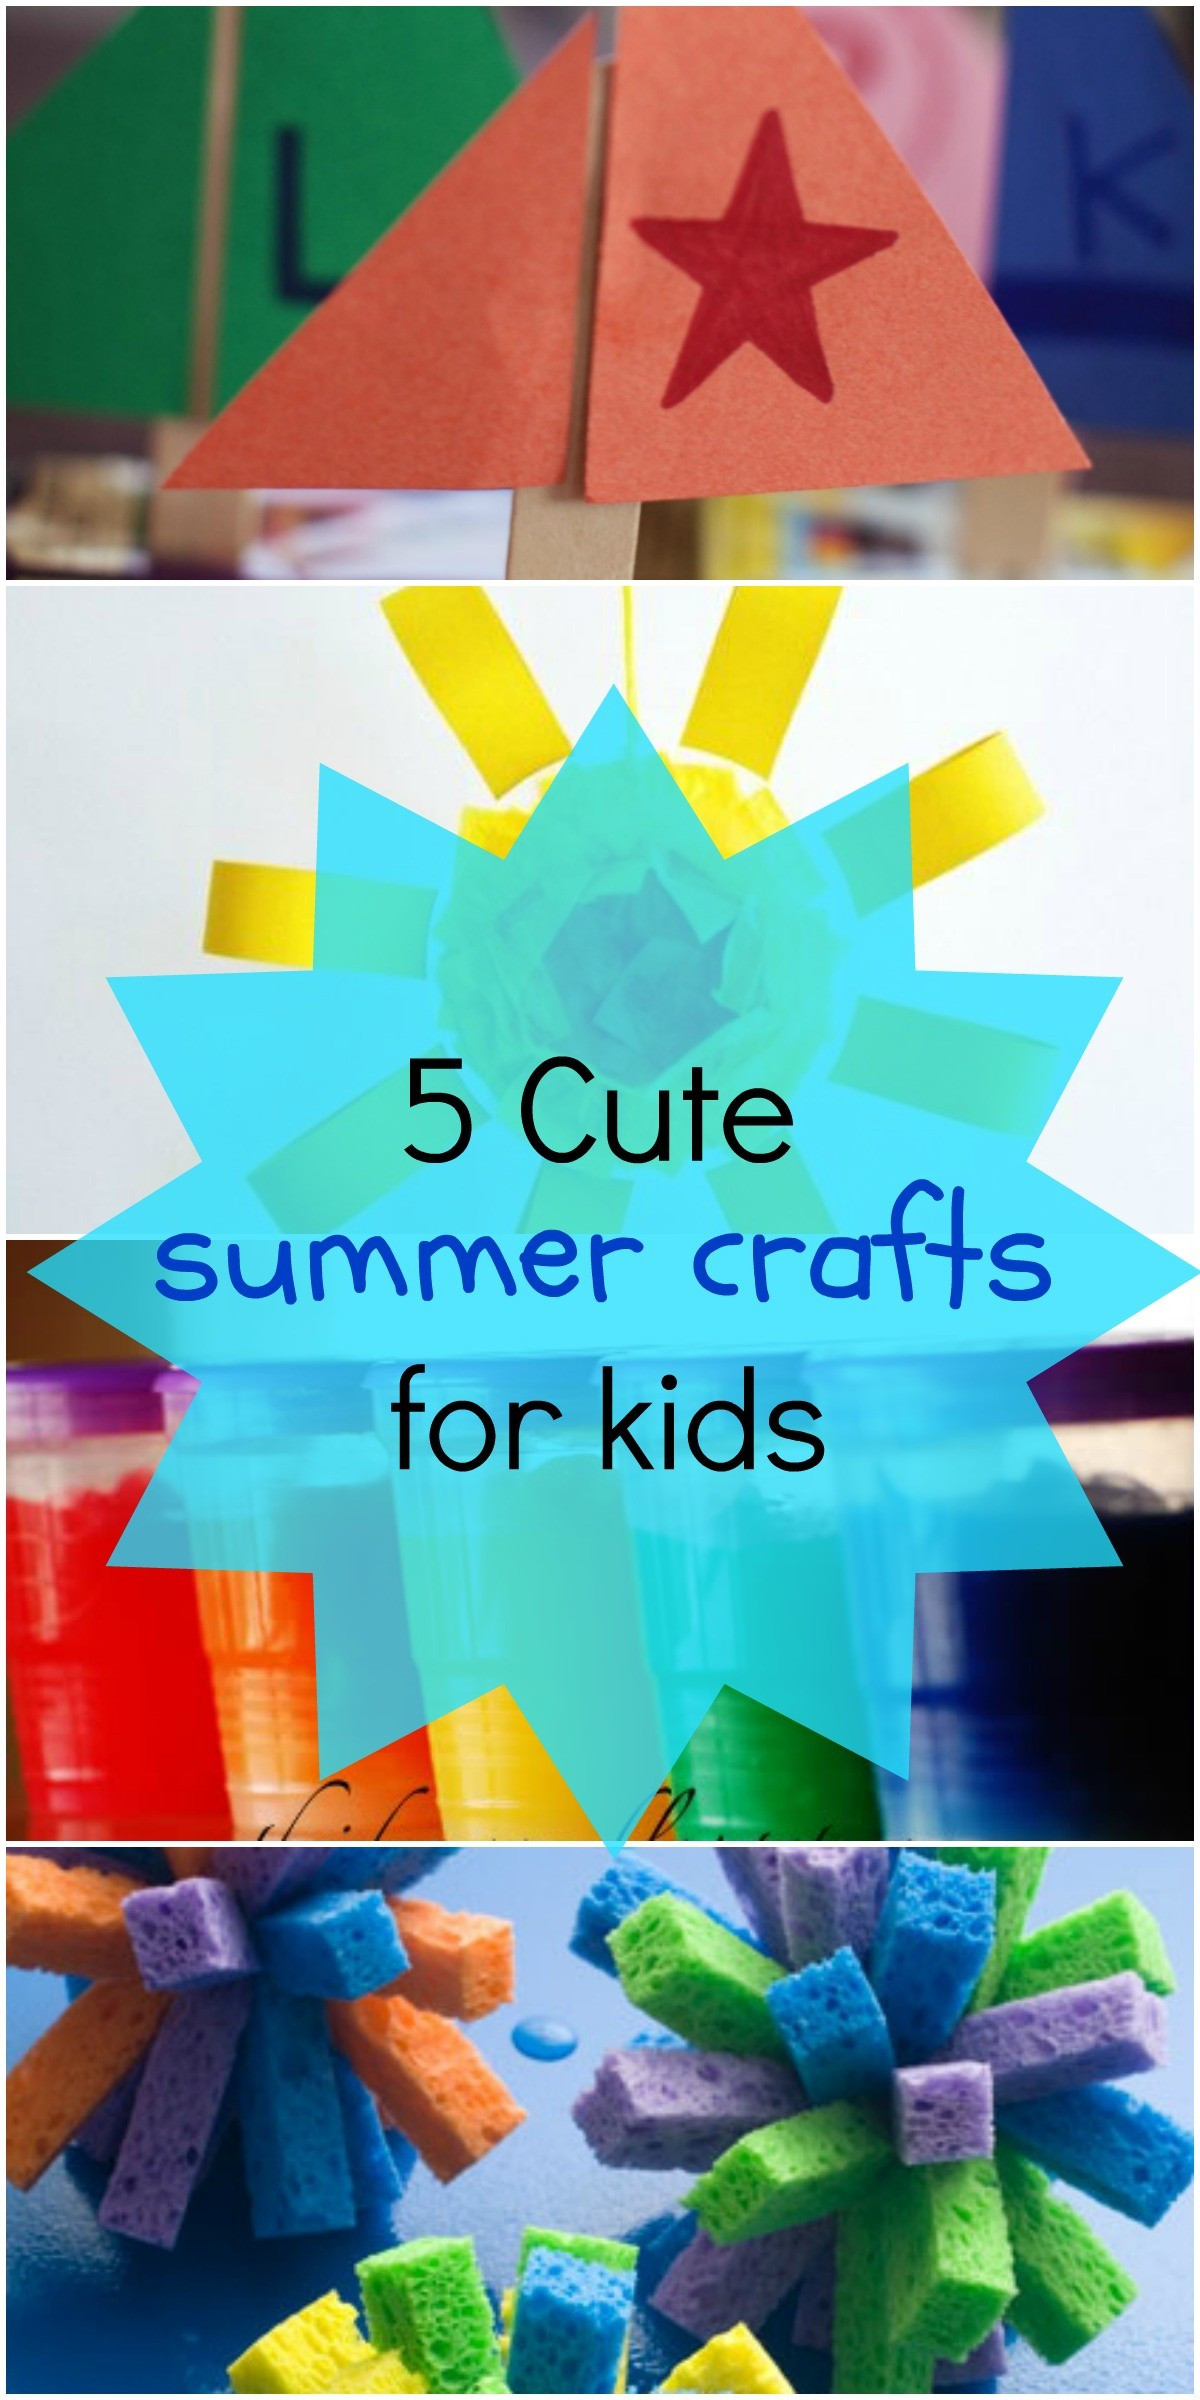 Summer Art Project For Kids
 5 Fun Summer Crafts for Kids Love These Art Project Ideas